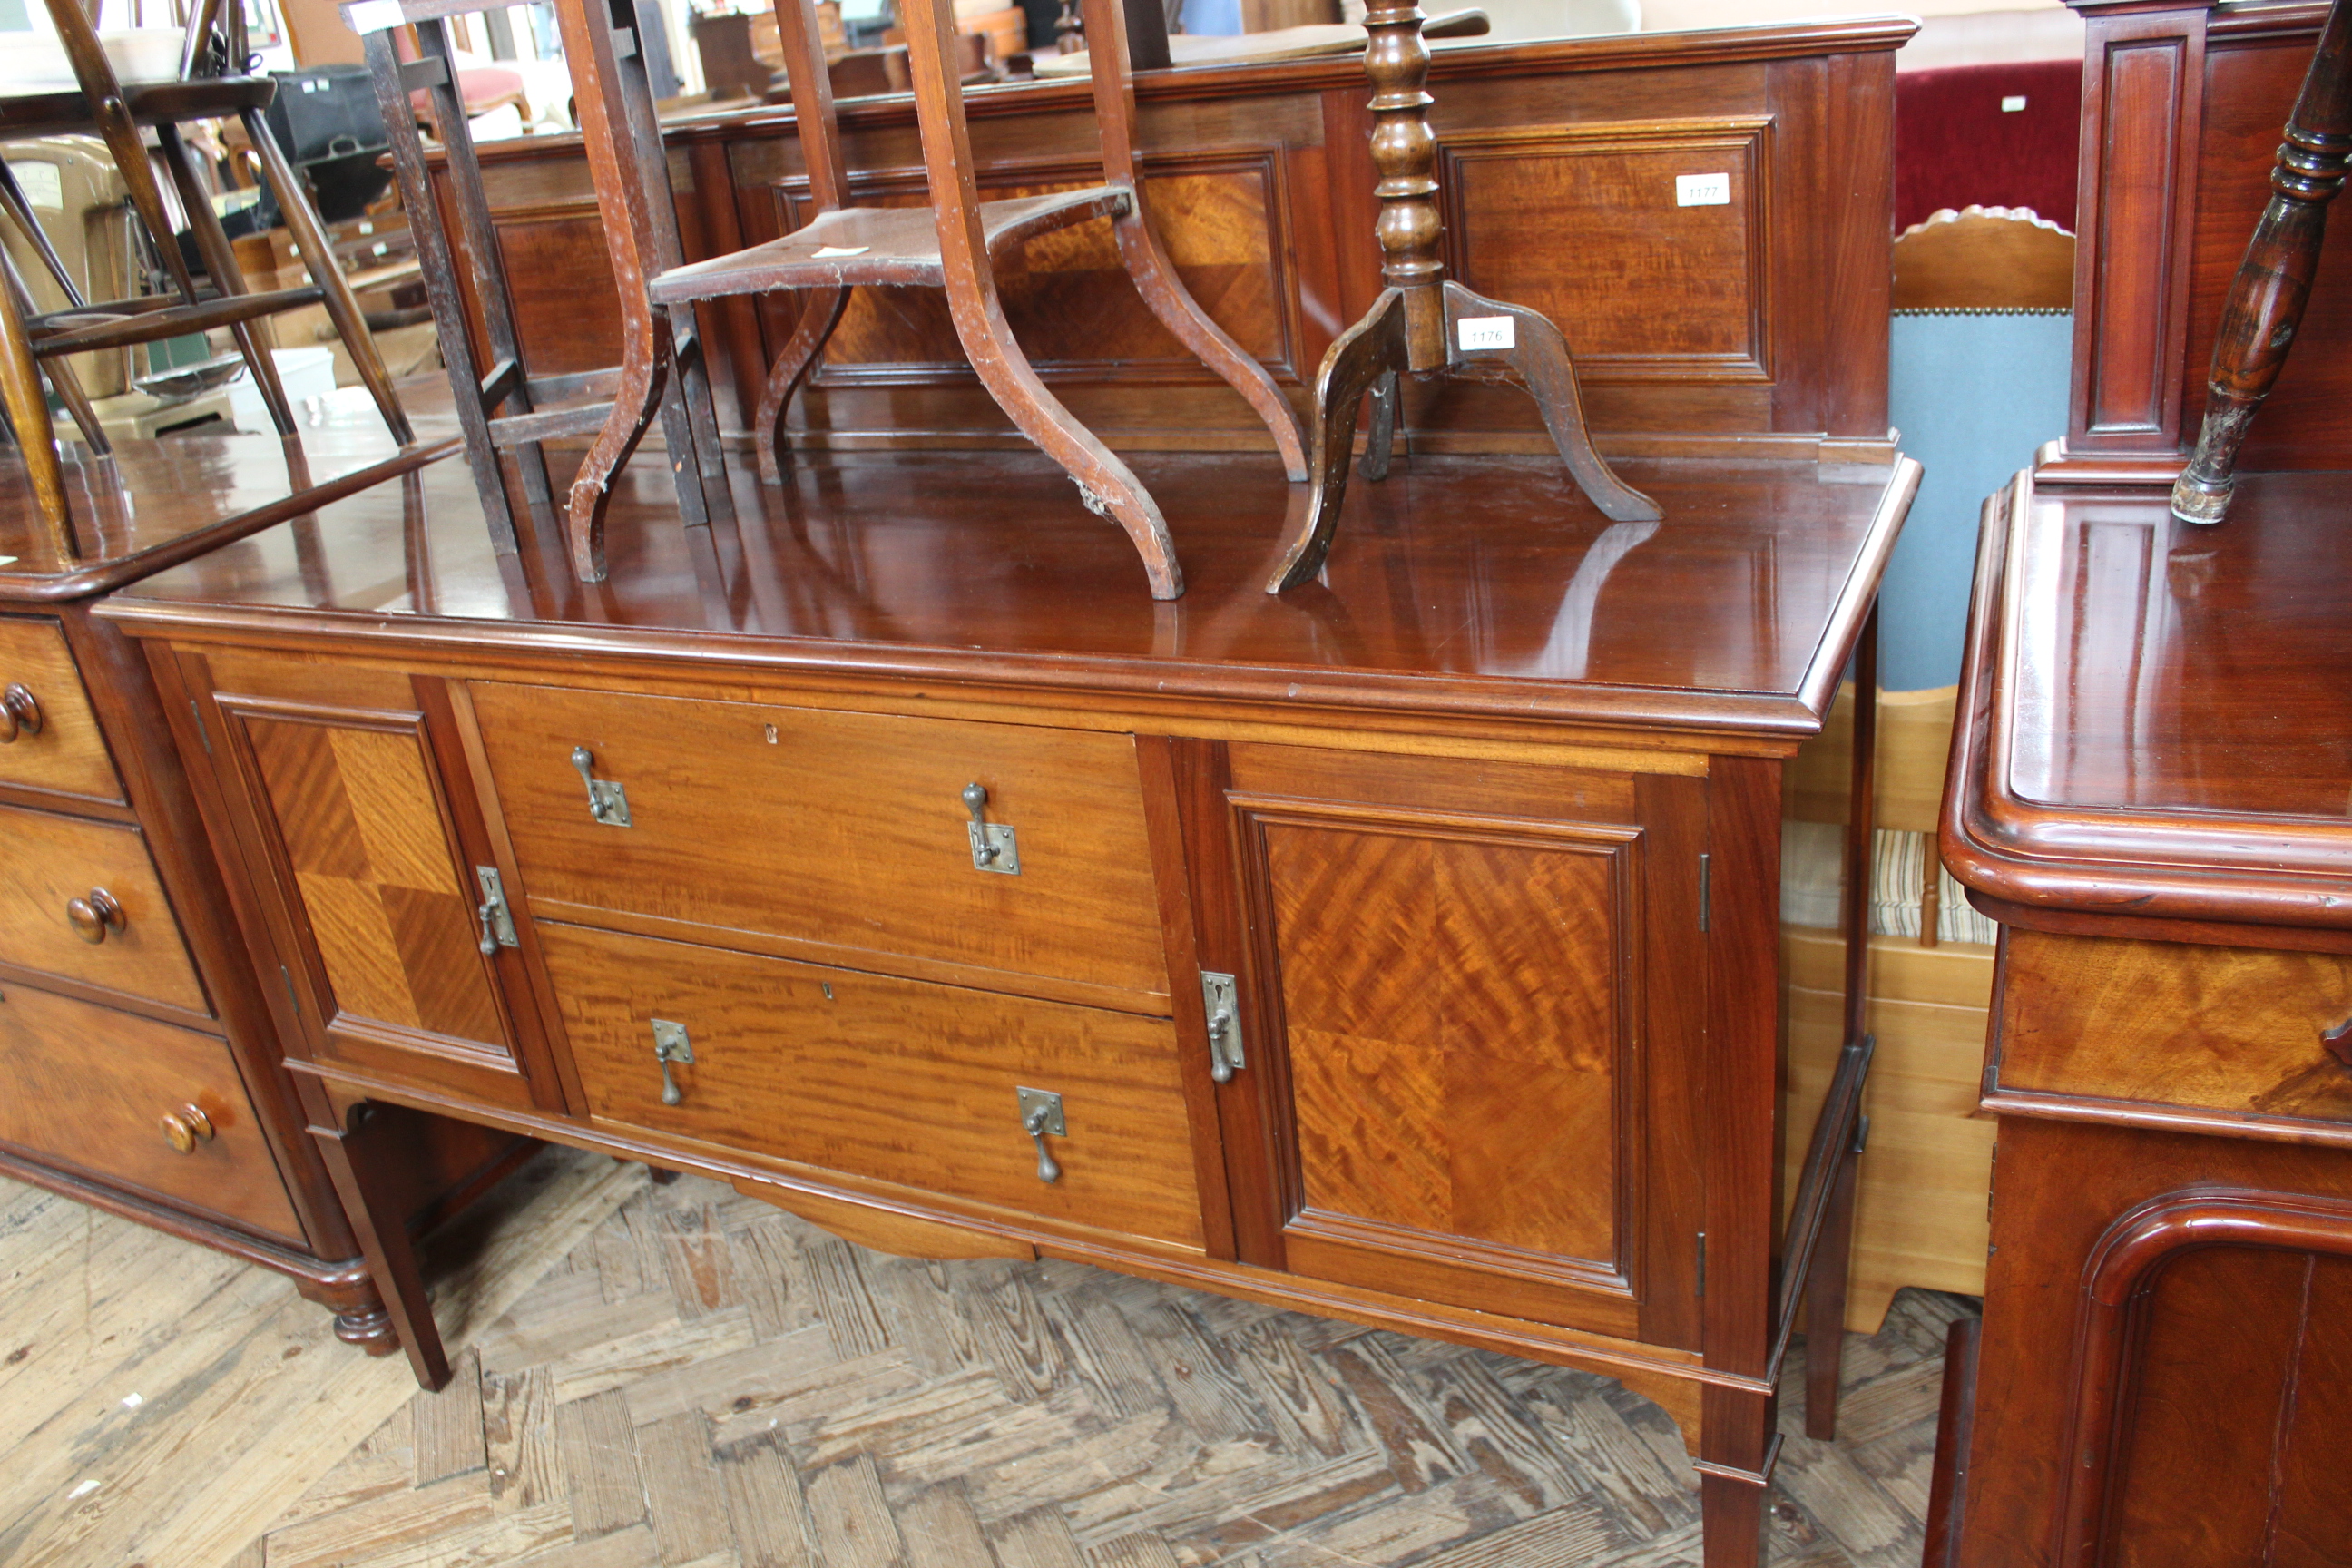 An Edwardian mahogany sideboard with panelled upstand